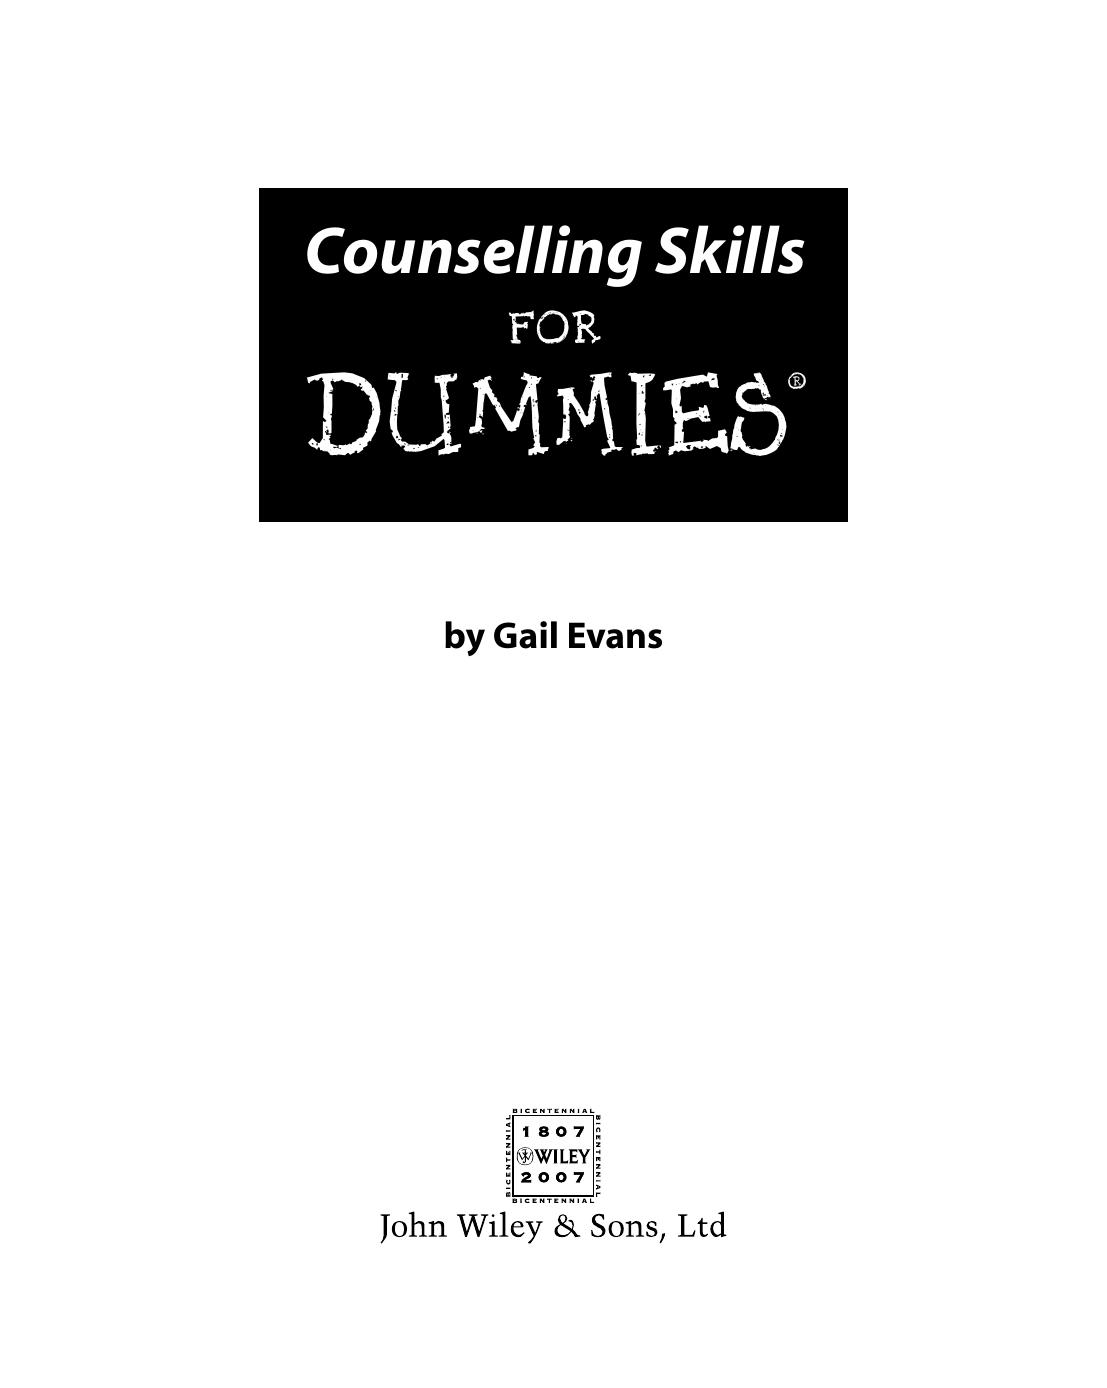 Counselling Skills For Dummies by Gail Evans